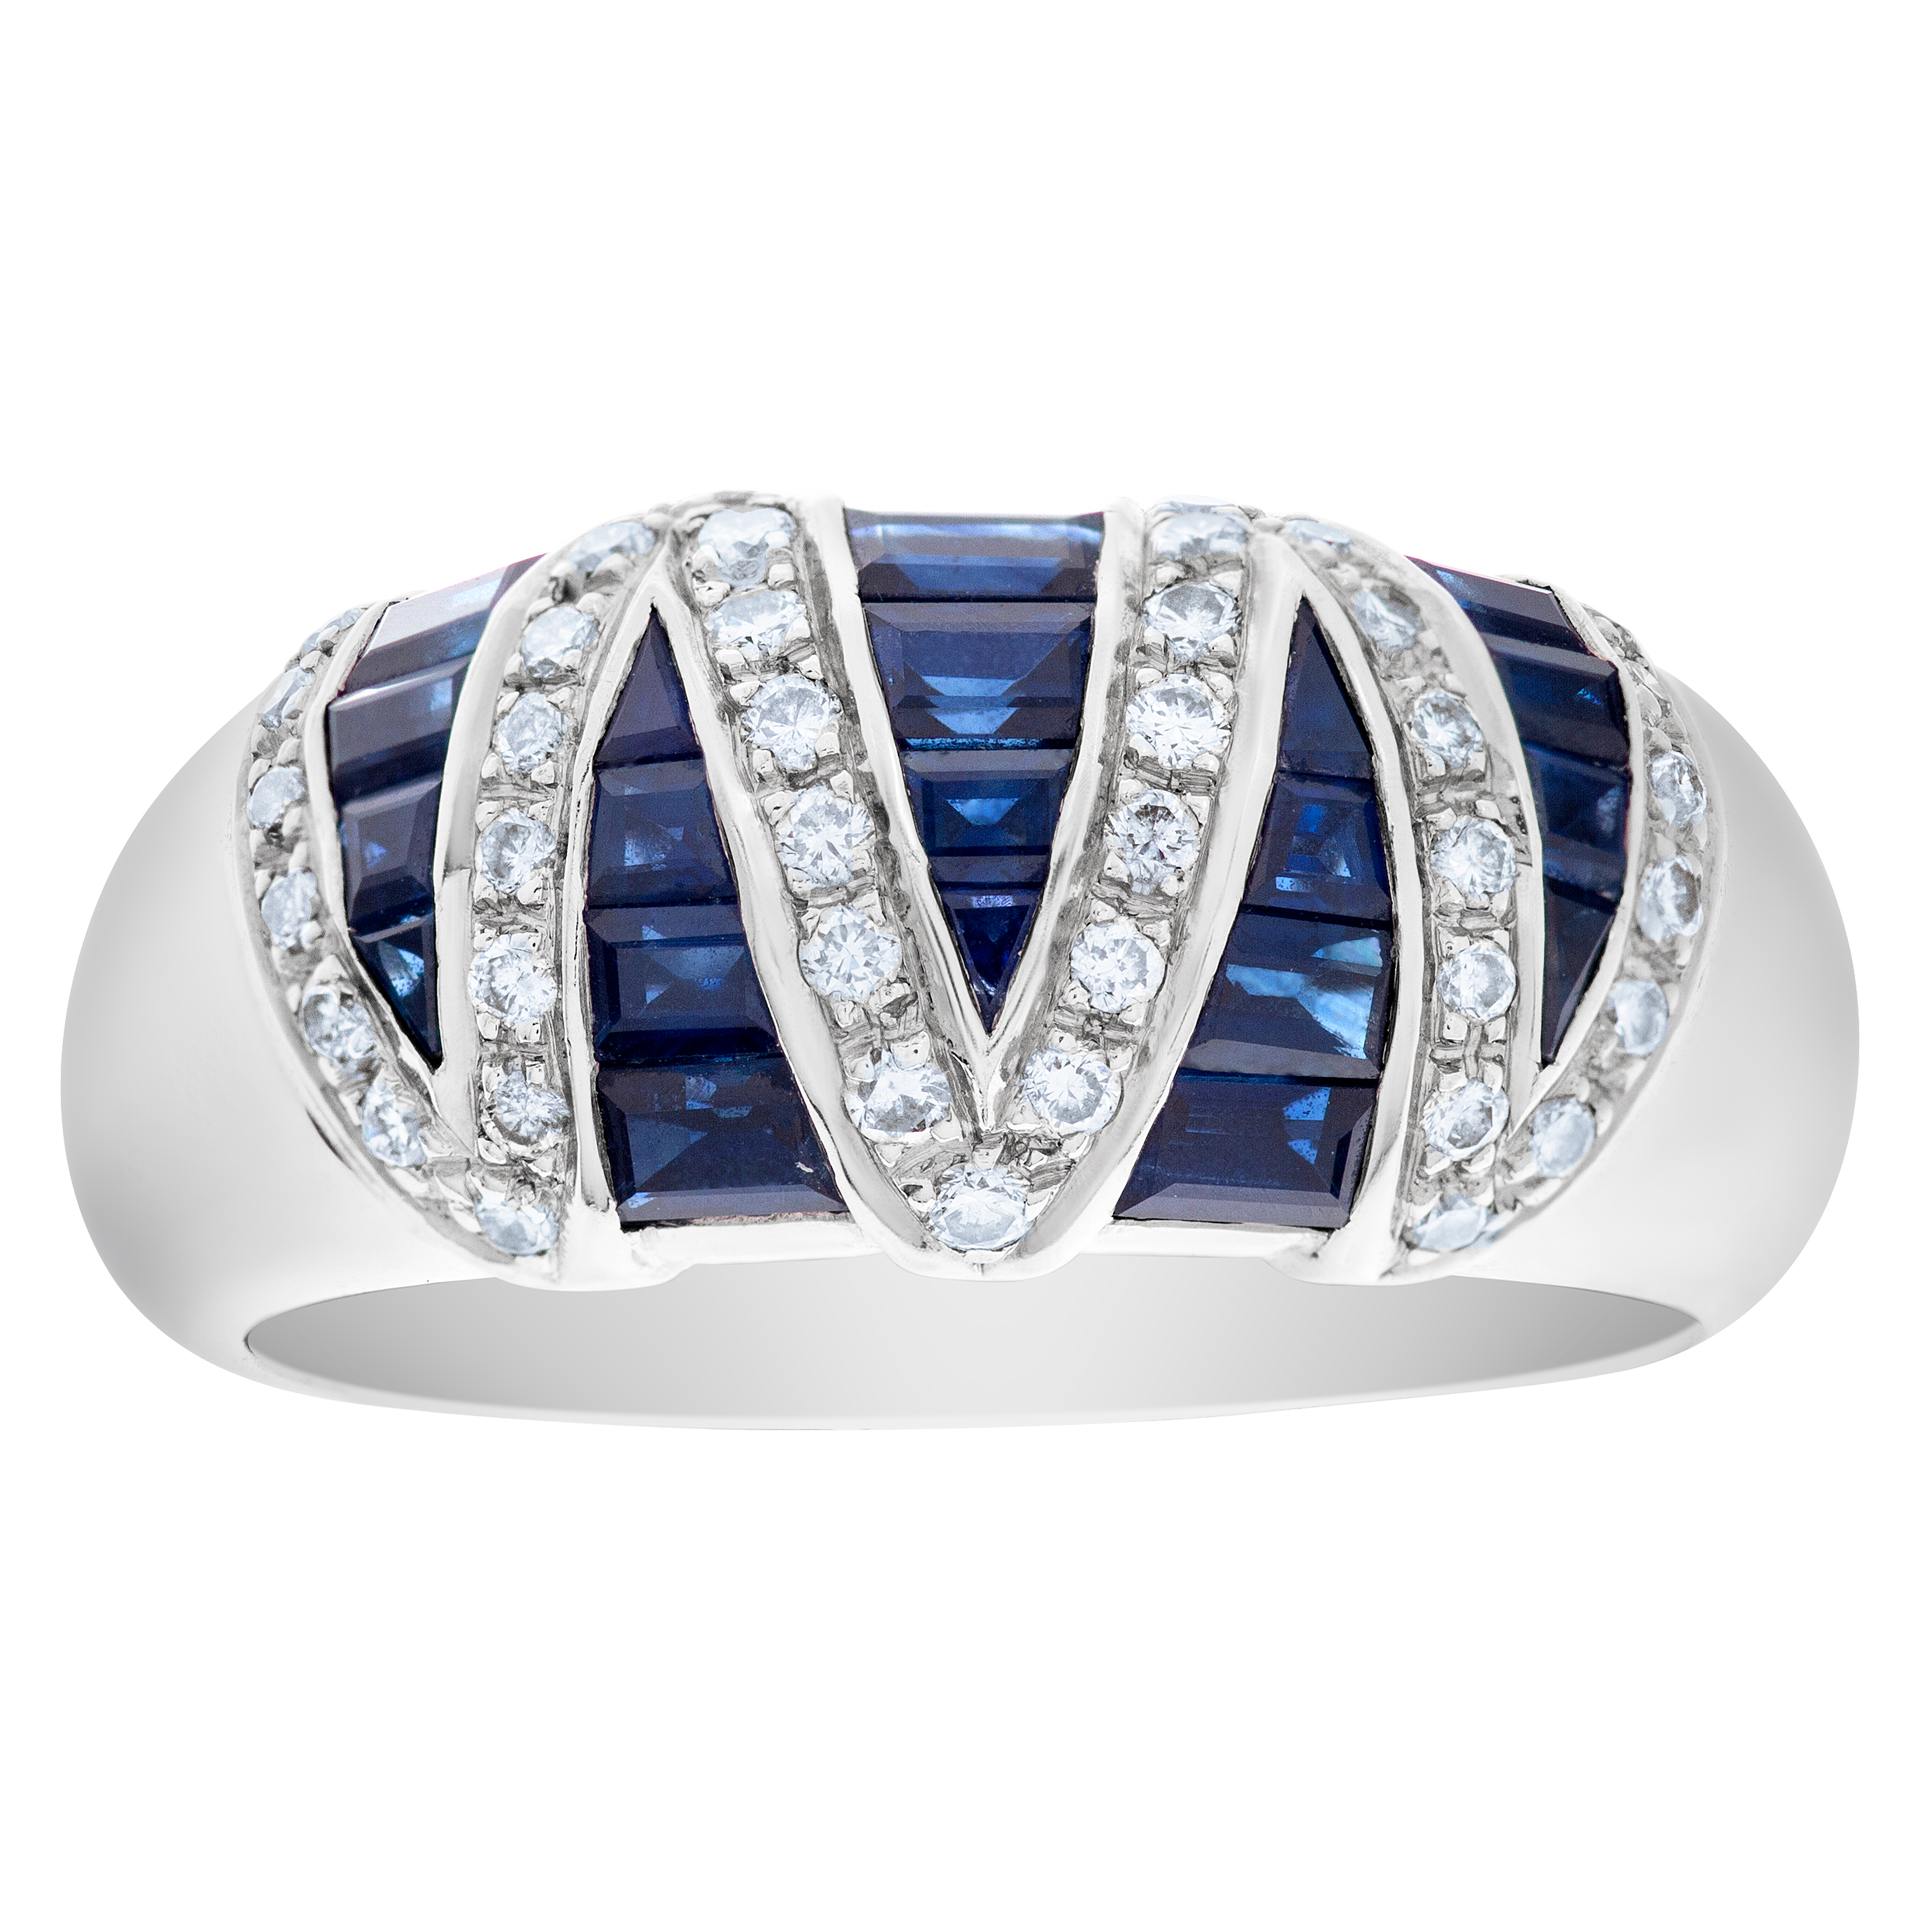 Sapphire and diamond ring in 18k white gold image 1